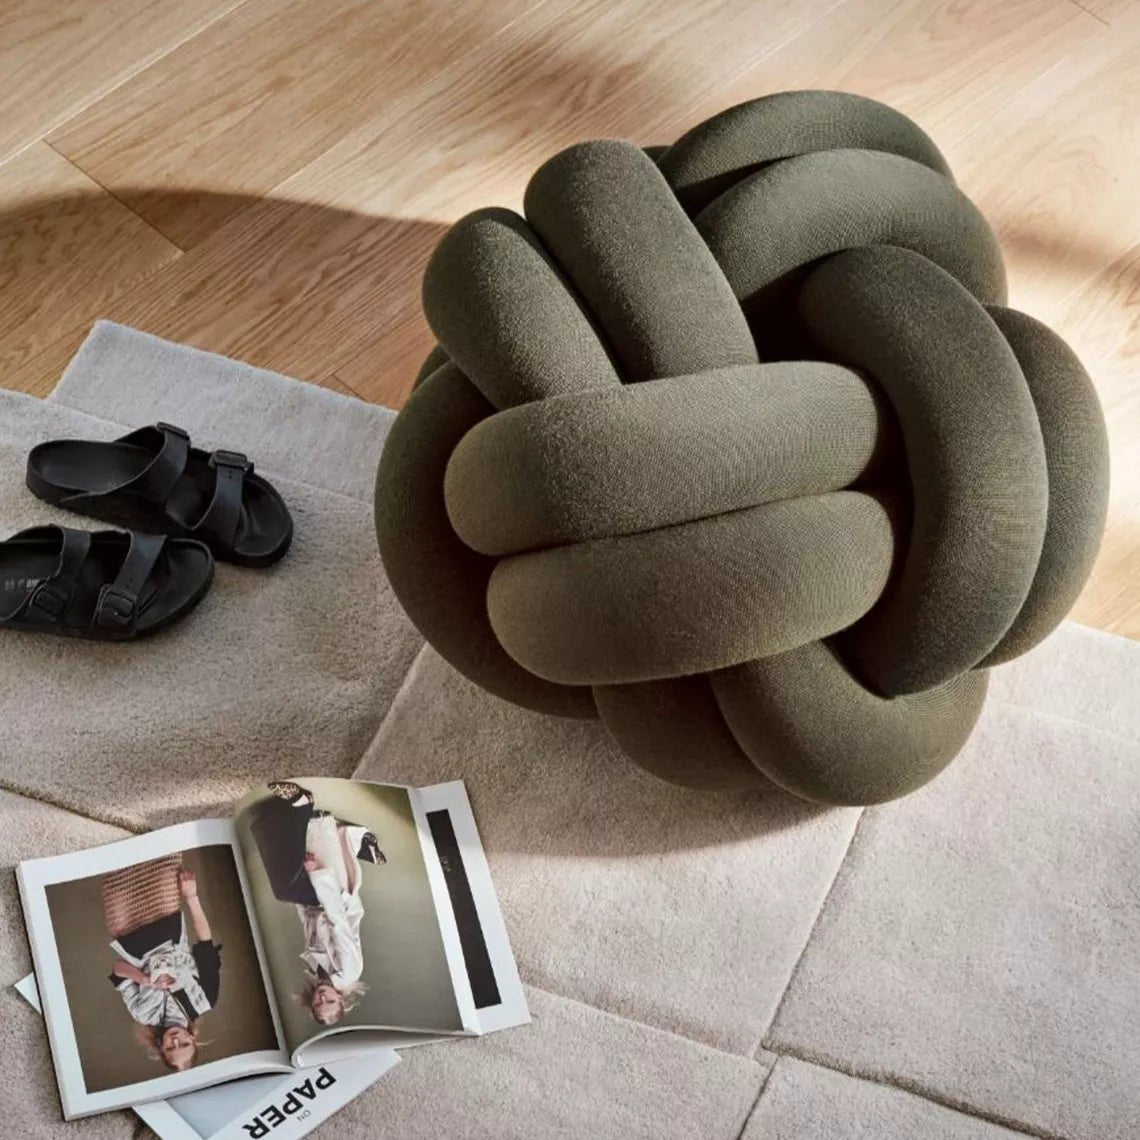 Knot Cusion XL - Knot seat cushion Seat cushion by Design House Stockholm